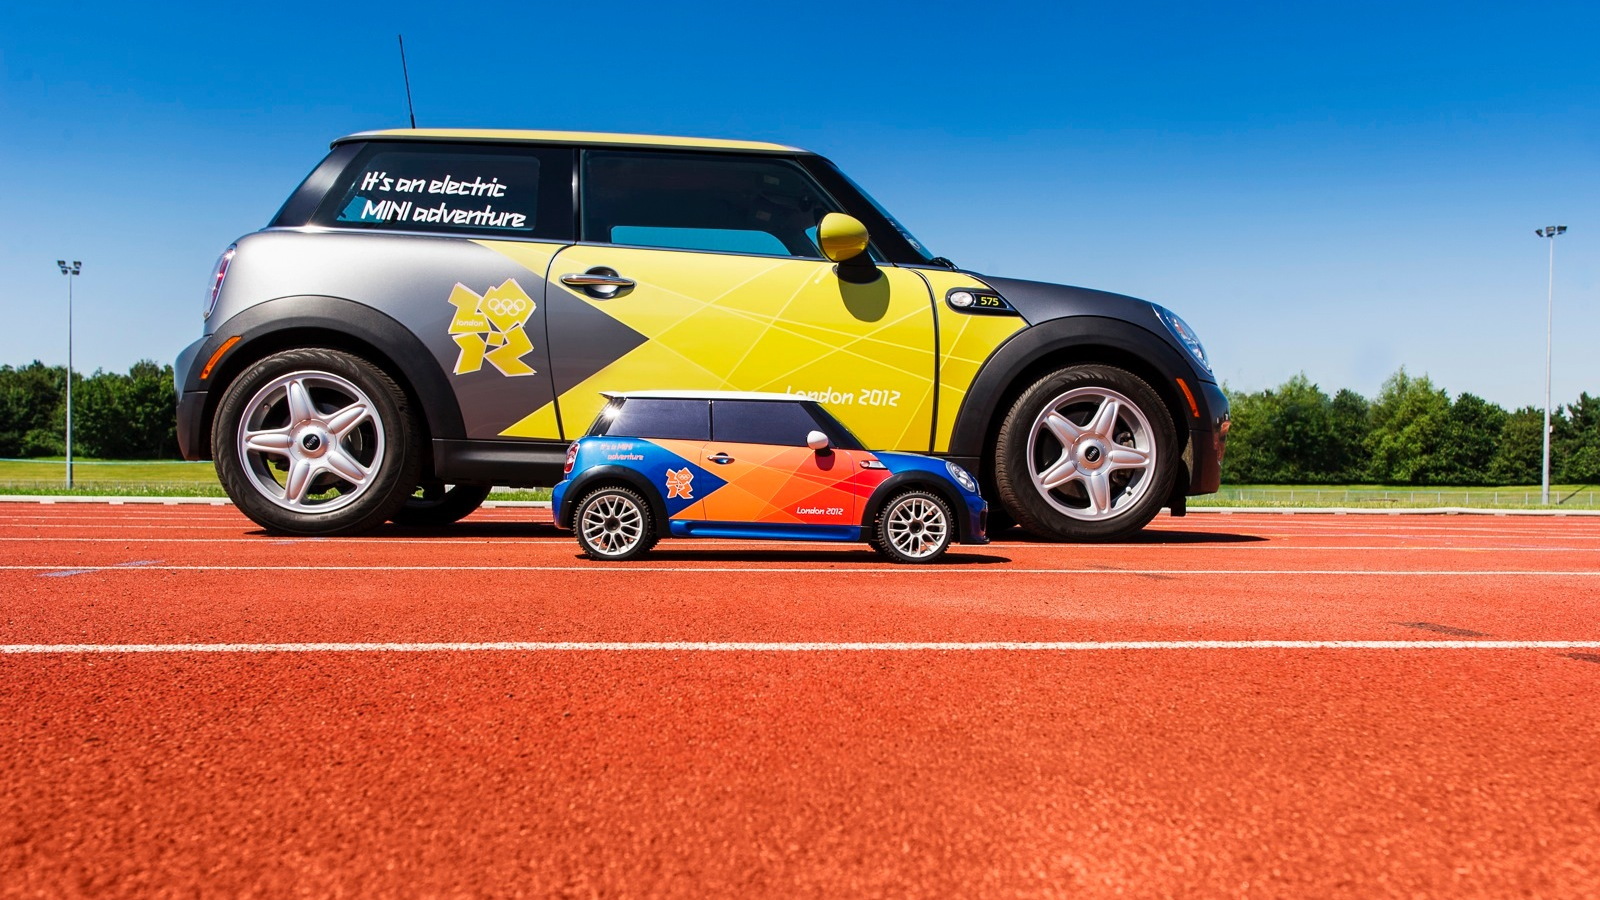 mini debuts new electric car at the london 2012 olympic games